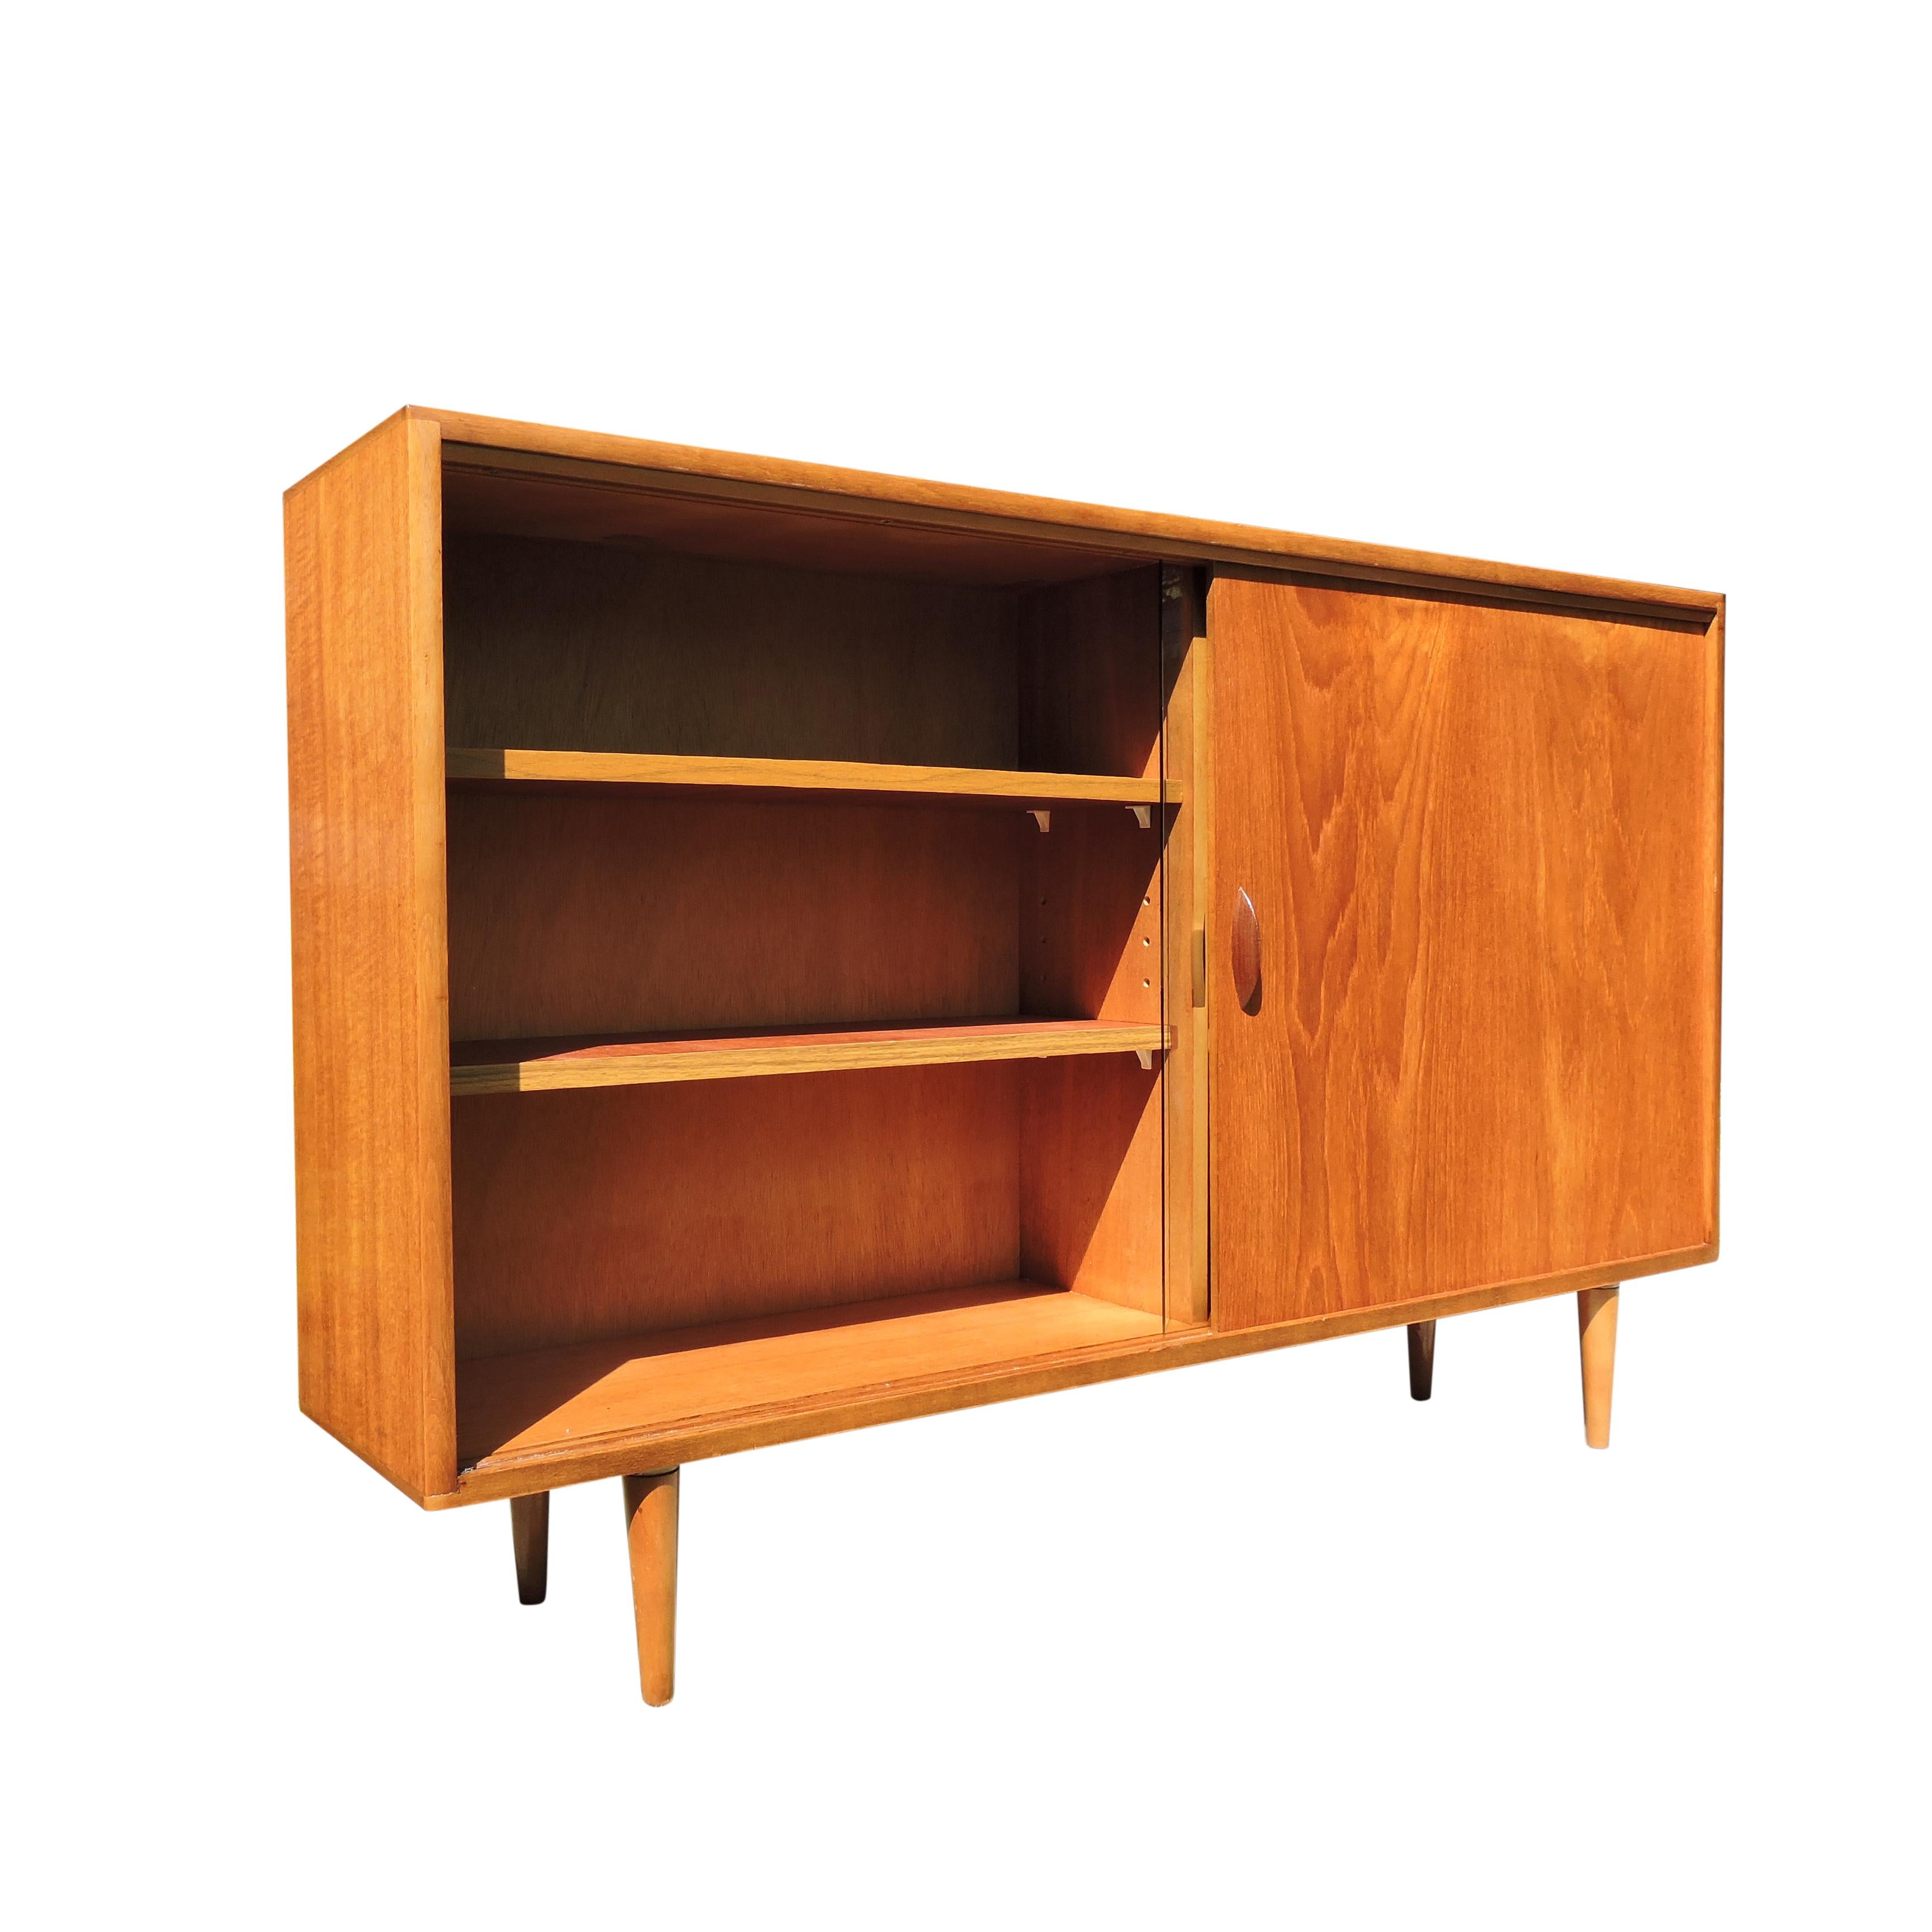 - Display cabinet with teak shelves
- Remains in solid and sturdy condition
- Features one glass sliding door and one teak sliding door
- Stands on tapered feet.